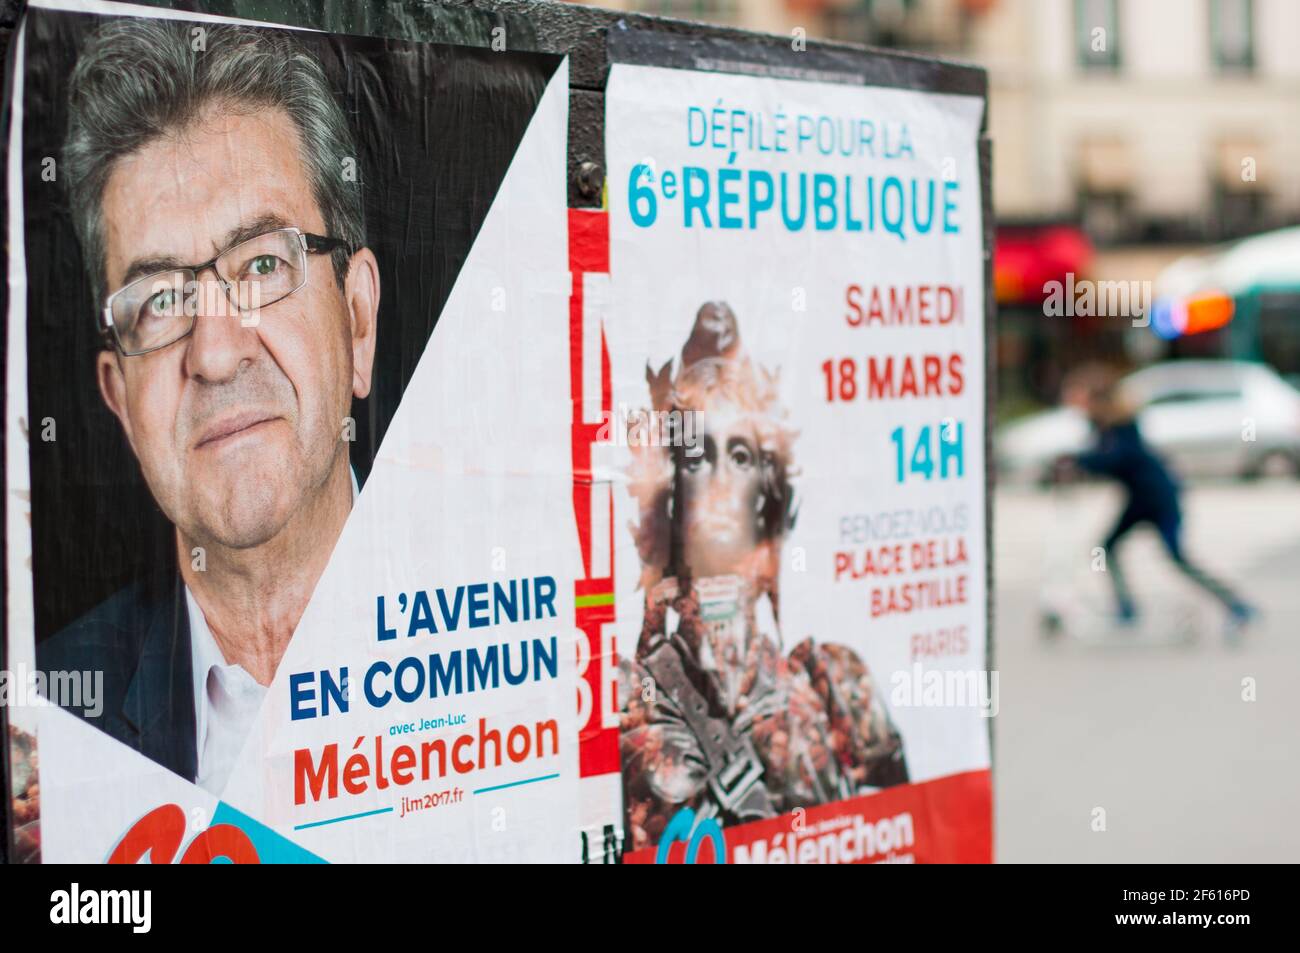 PARIS, FRANCE - MARCH 28, 2017 : Jean-Luc Mélenchon campaign poster for french presidential election. Stock Photo